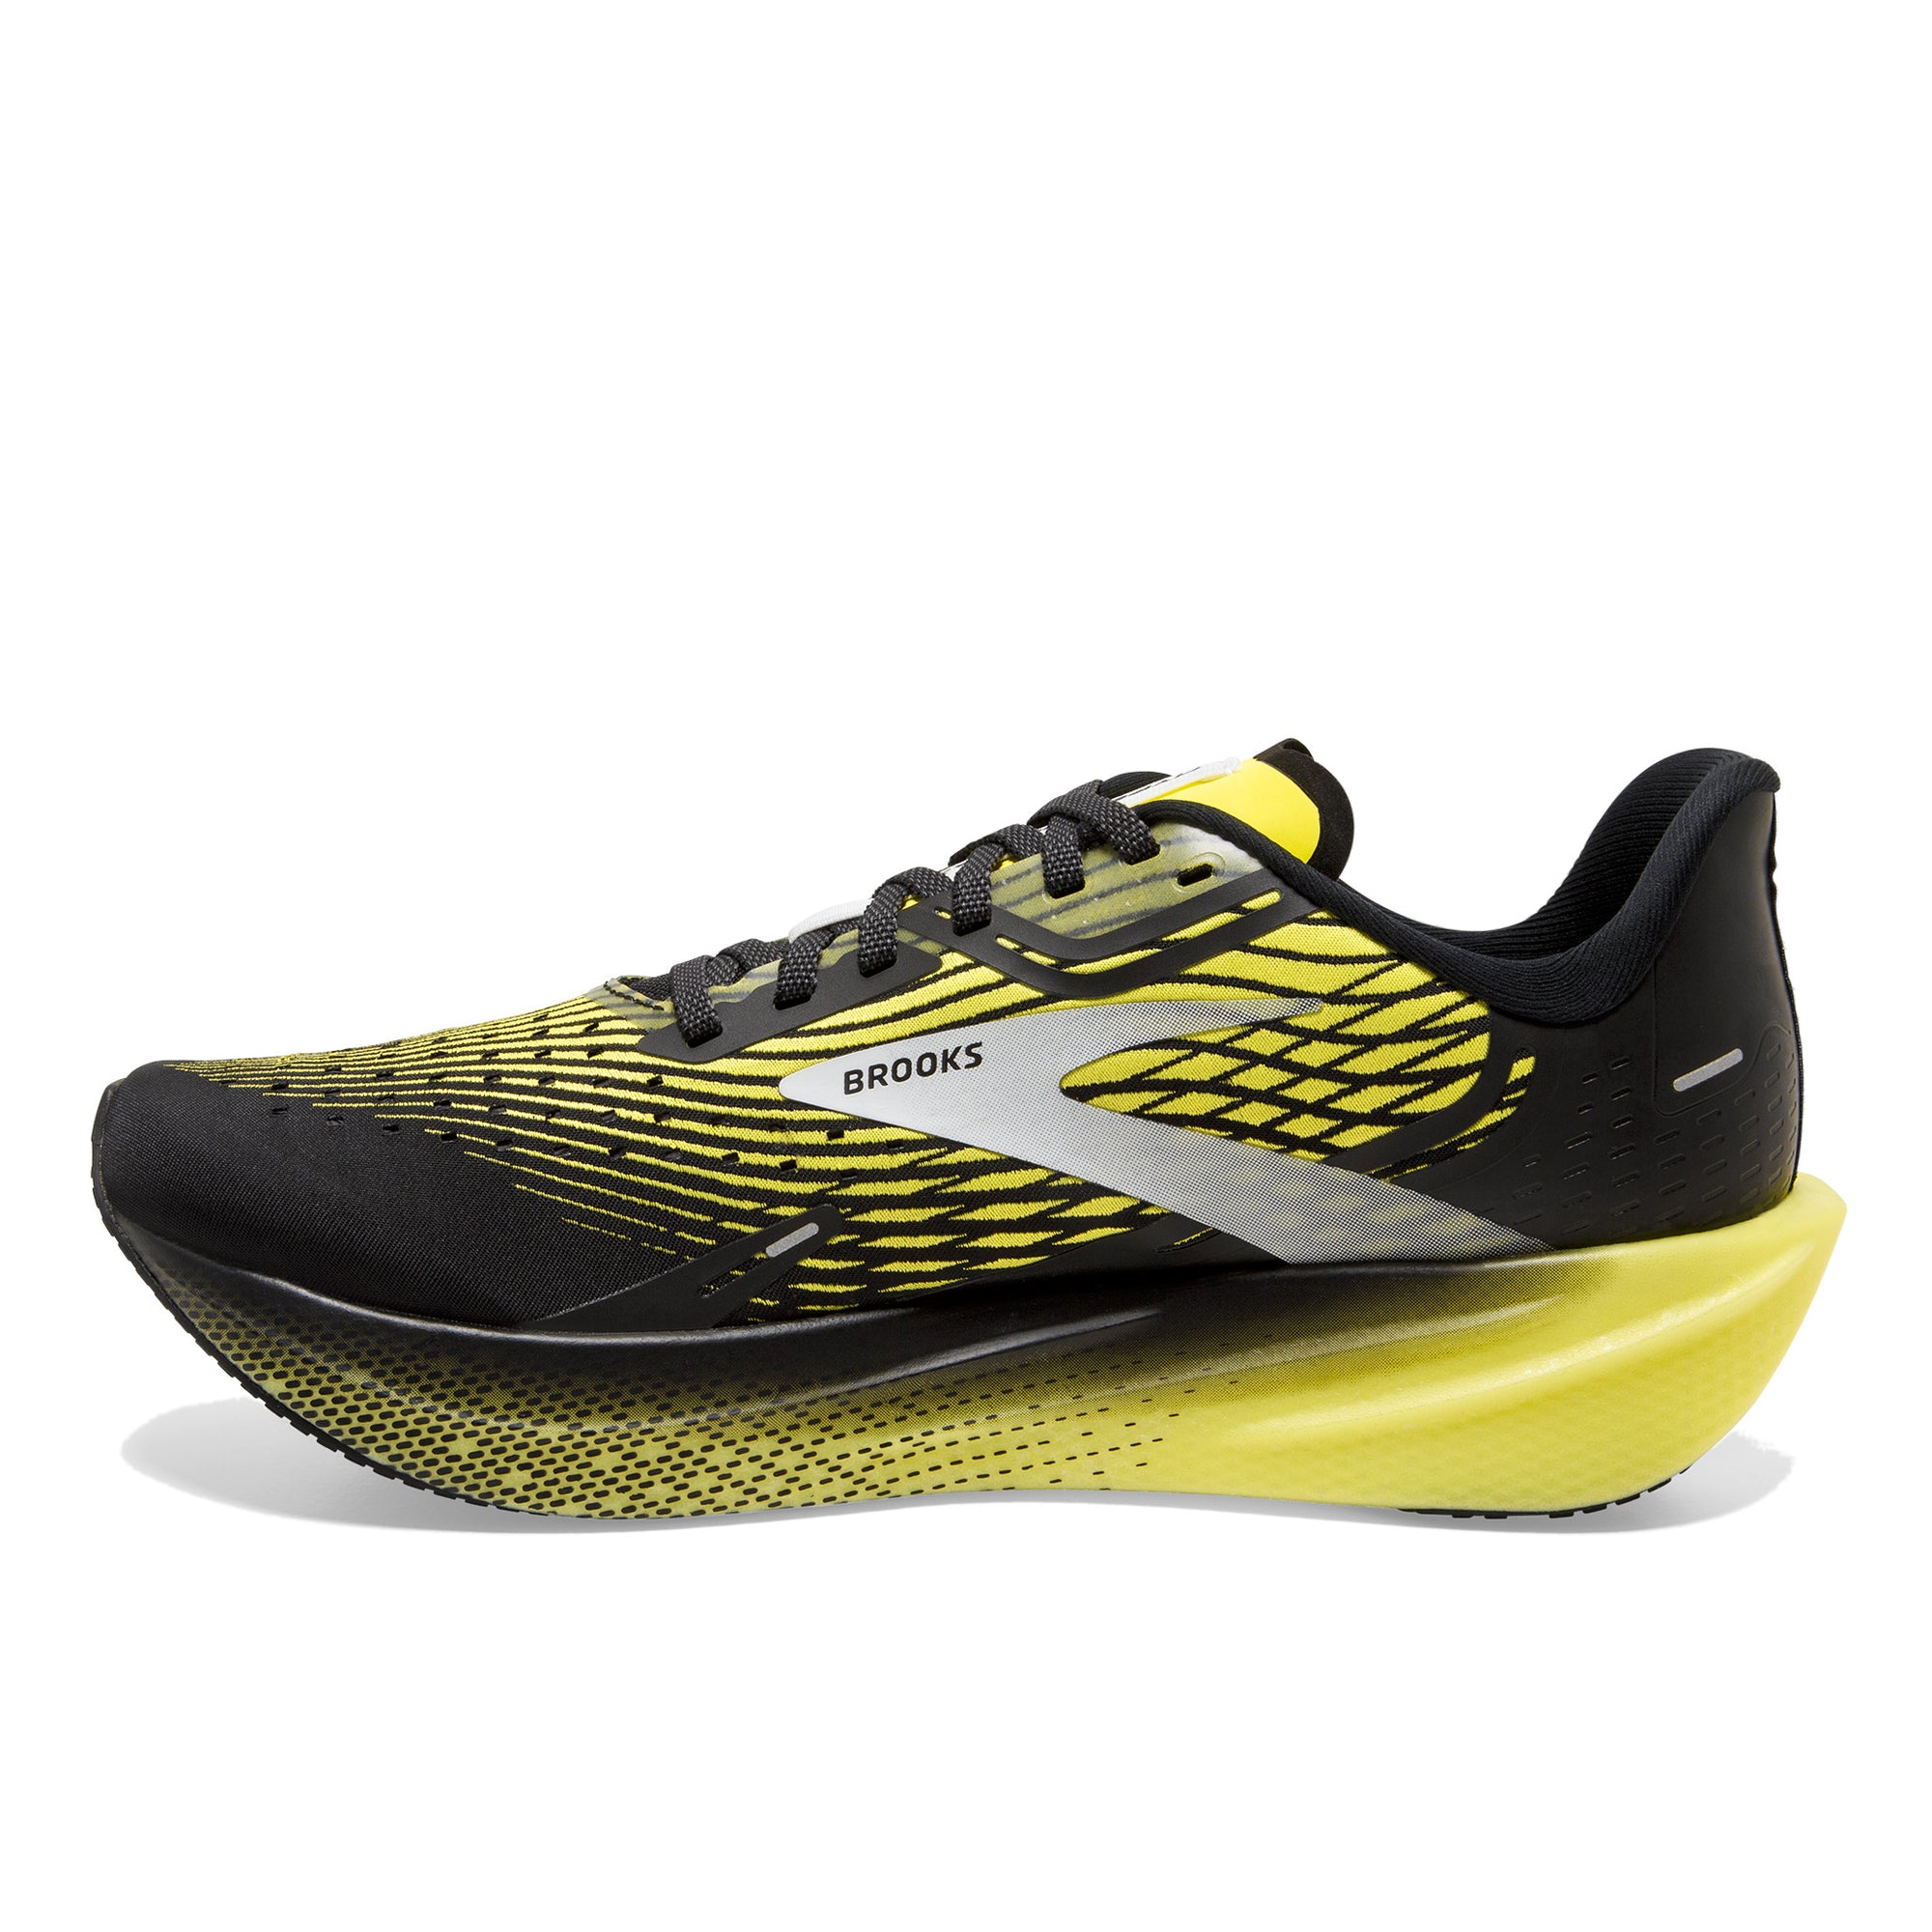 BROOKS HYPERION MAX - HOMME